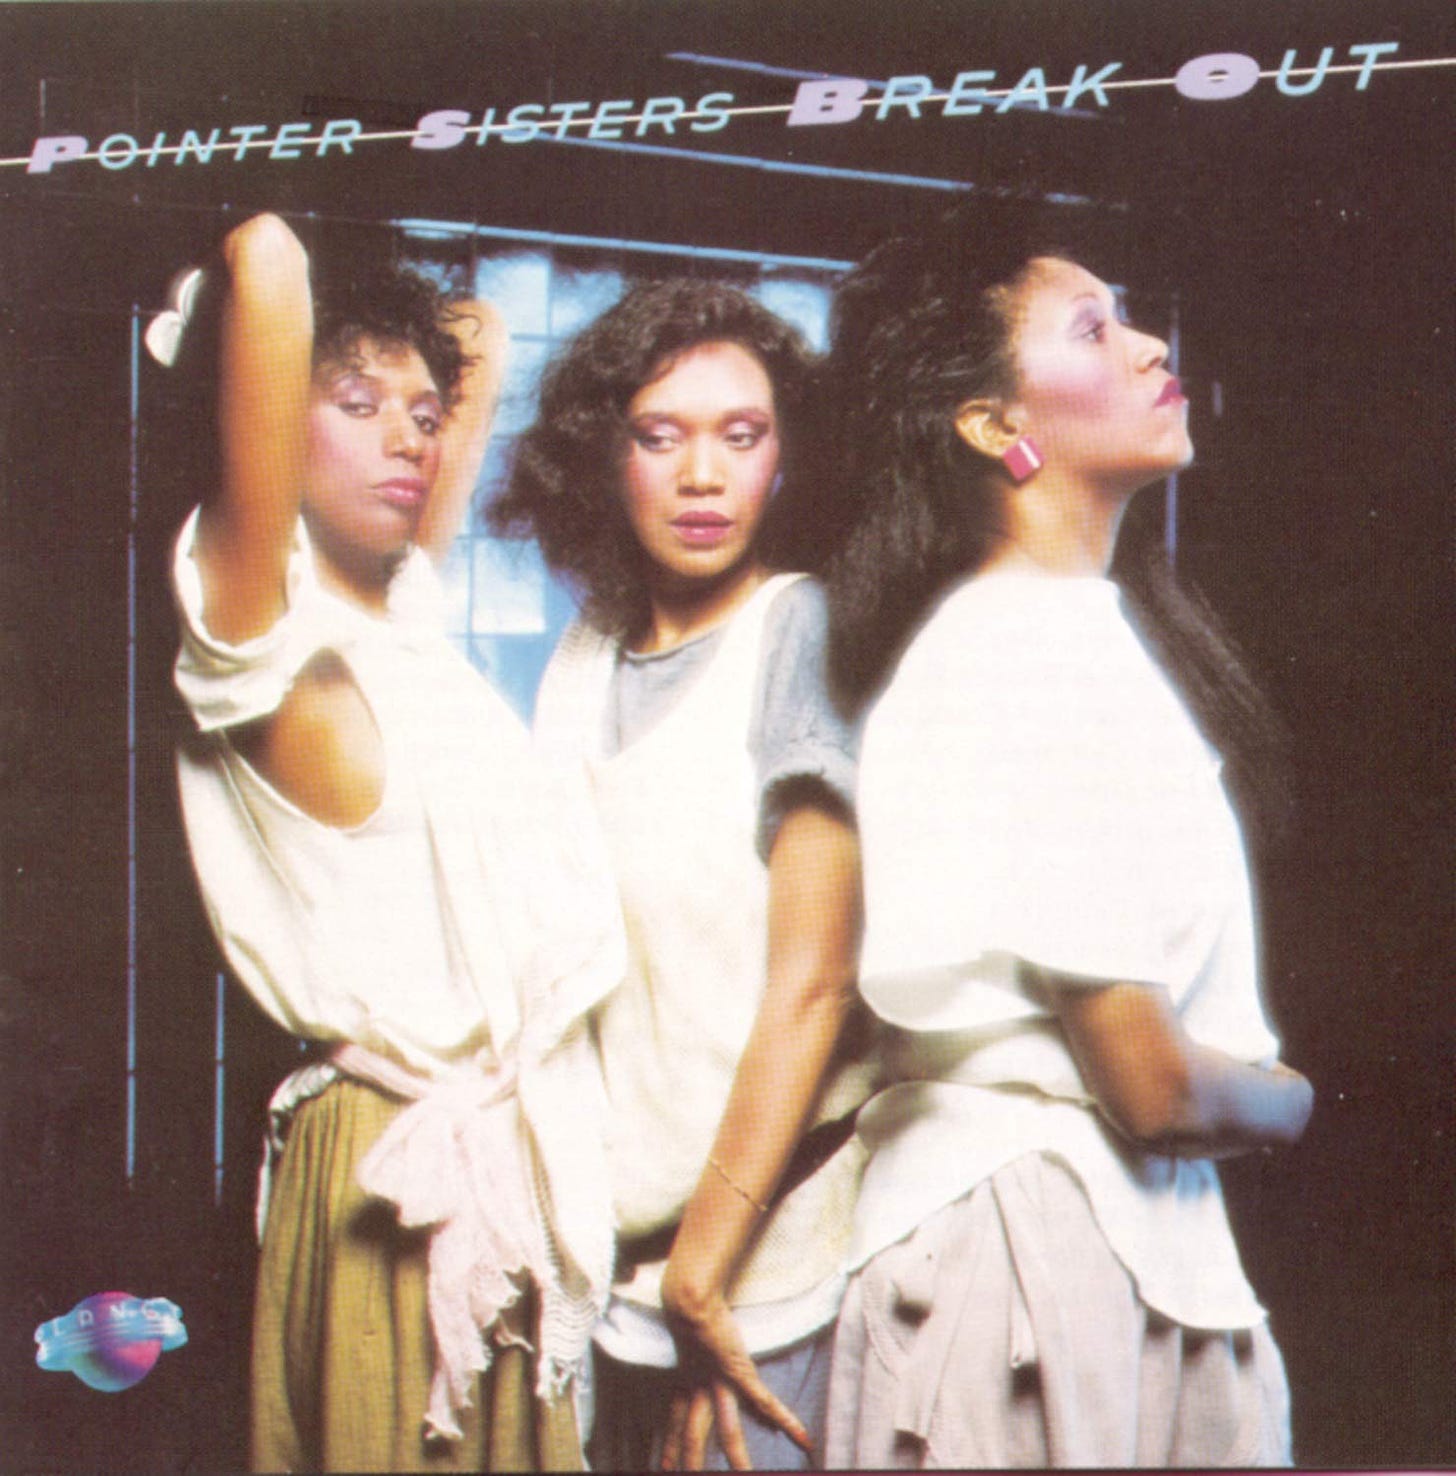 The Pointer Sisters - Break Out - Amazon.com Music